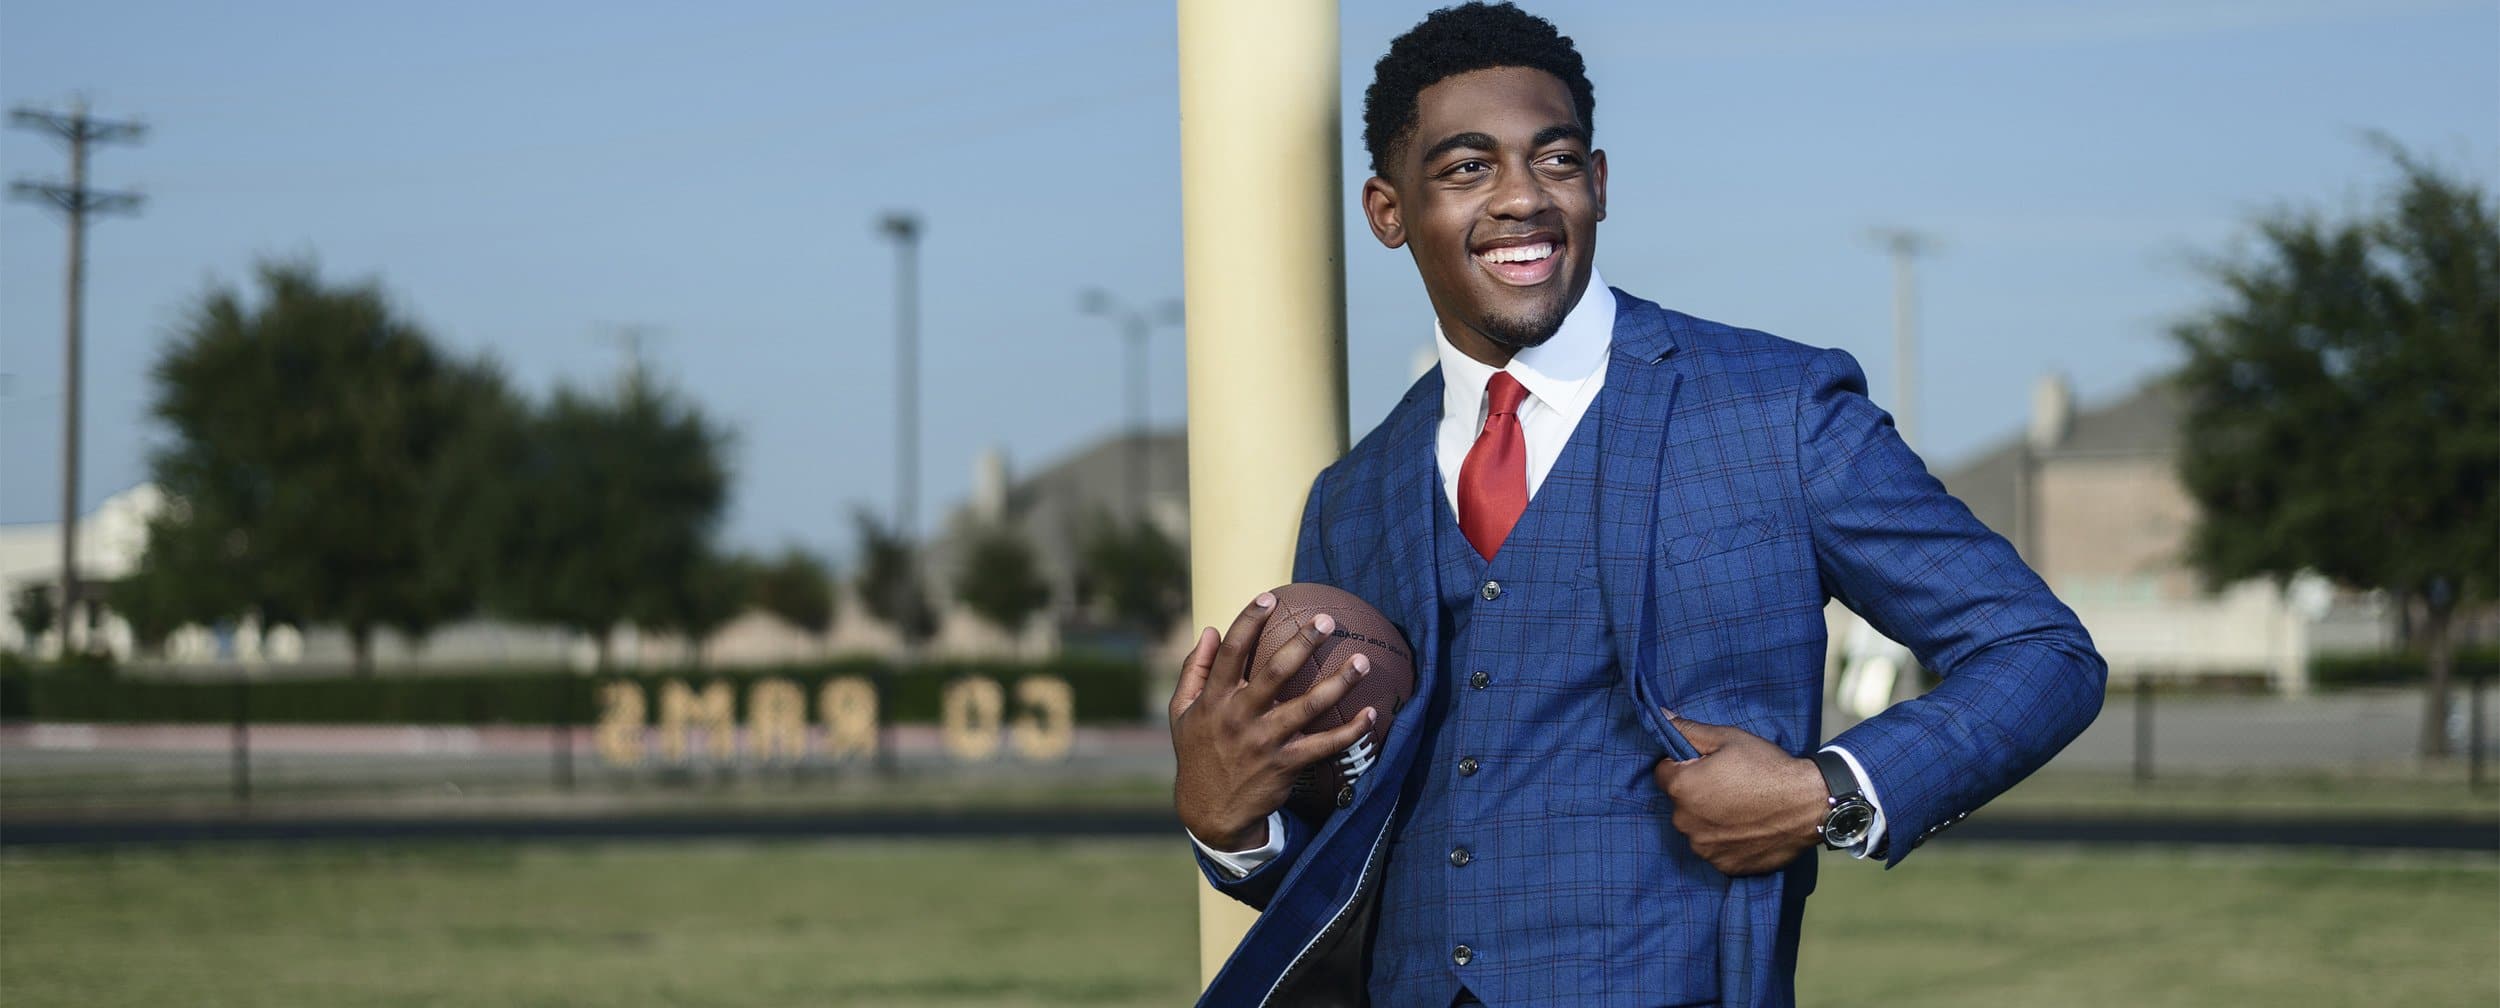 senior pictures in mckinney texas by jeff dietz photography of McKinney north football player in suit